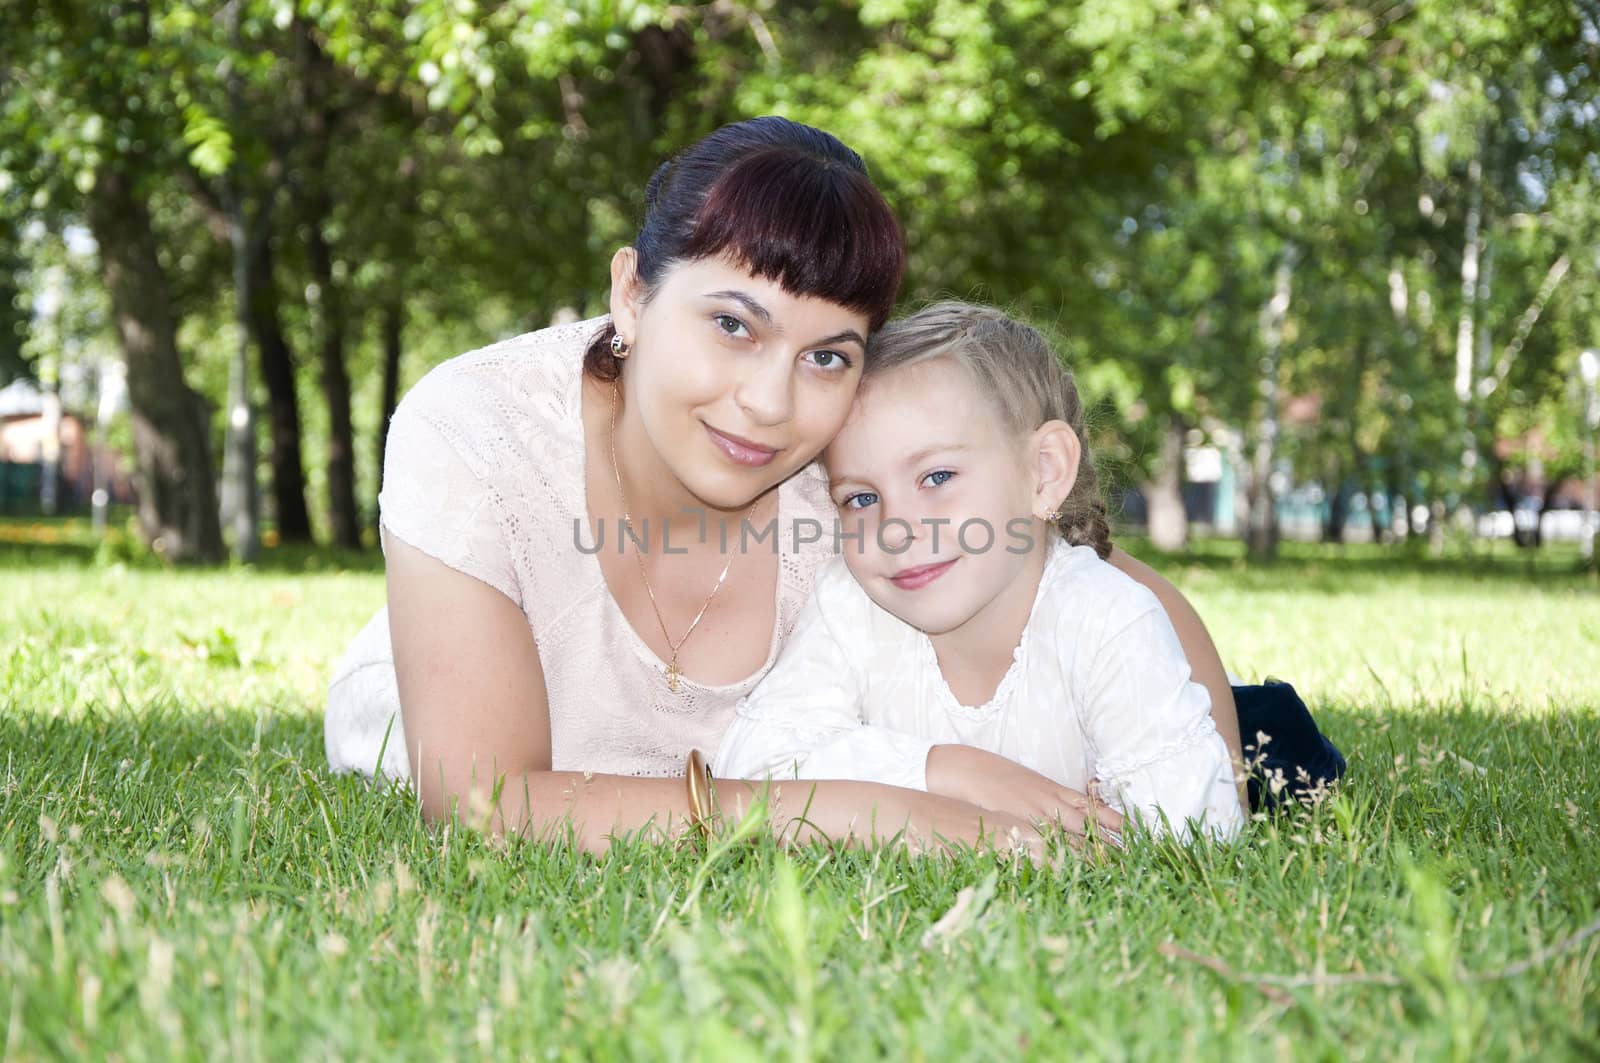 The portrait of the baby and mother in the park, on the green grass